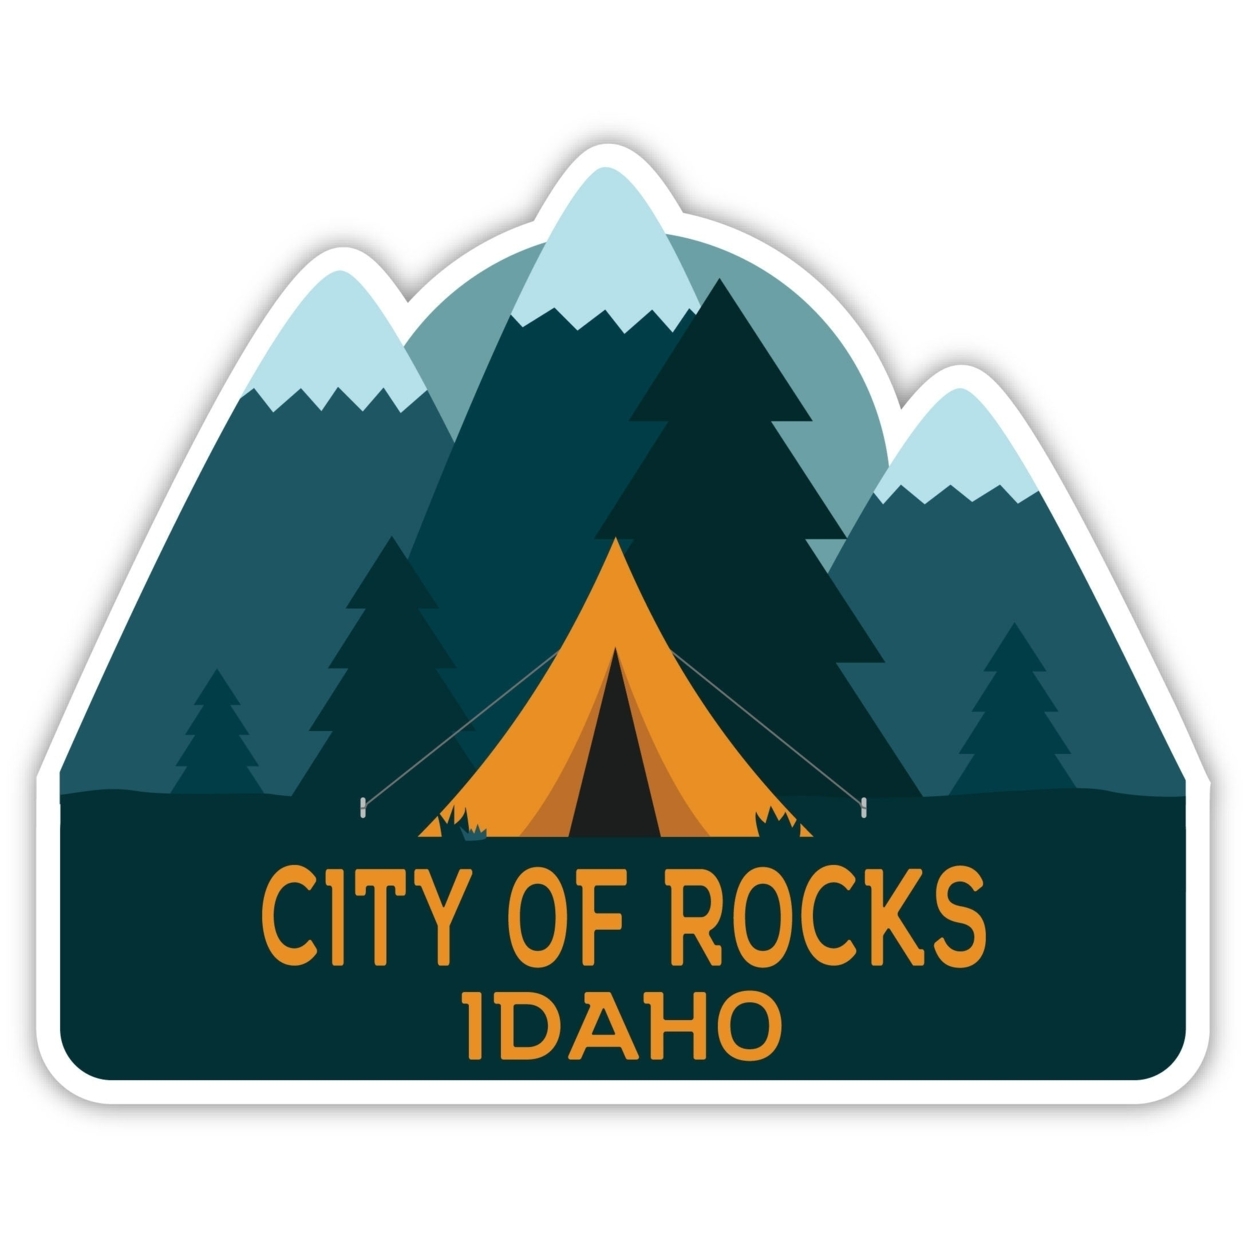 City Of Rocks Idaho Souvenir Decorative Stickers (Choose Theme And Size) - 4-Pack, 8-Inch, Tent